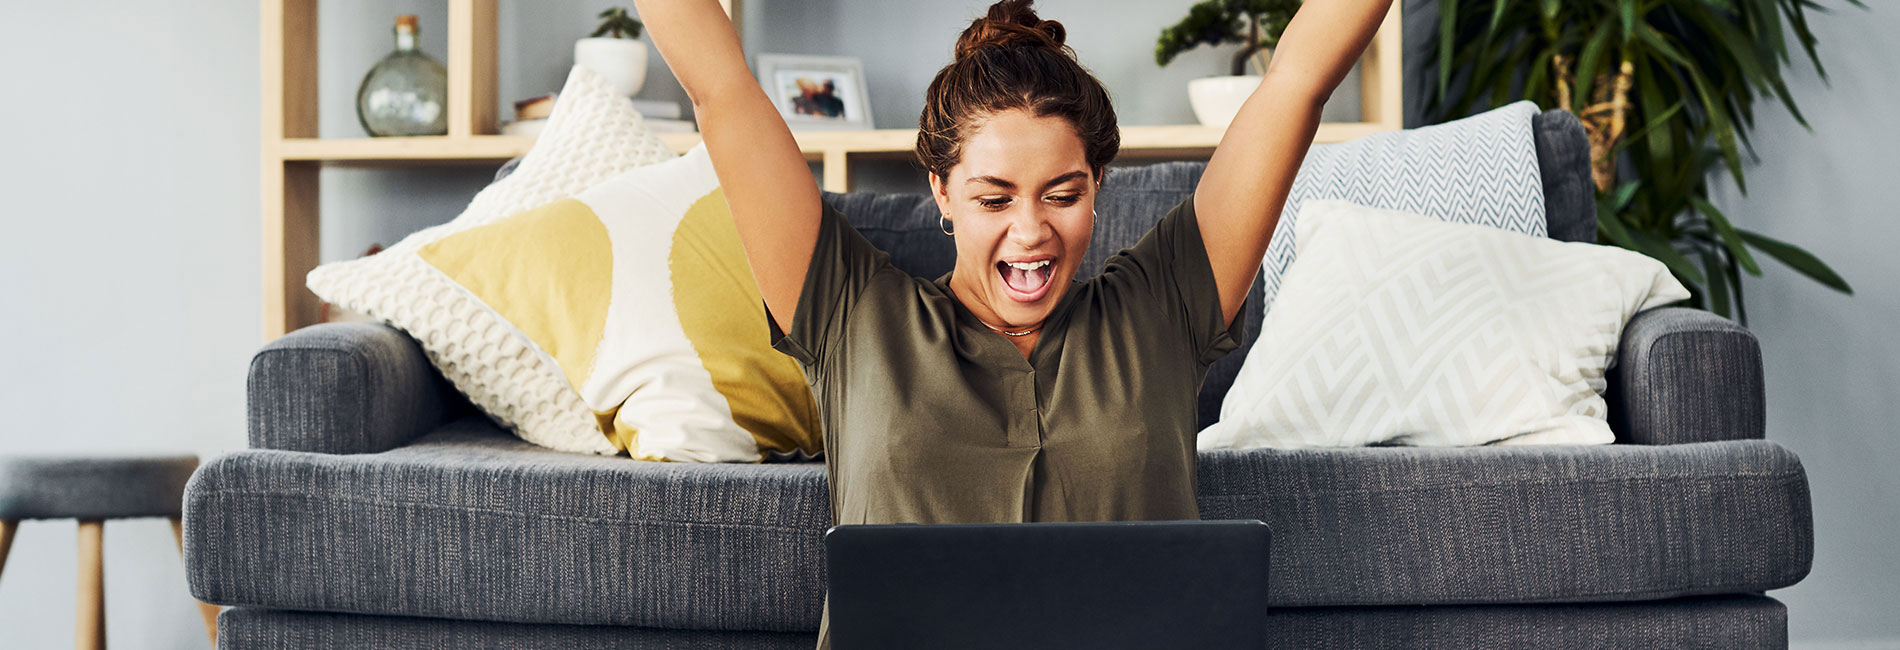 A woman happily cheering in front of her laptop